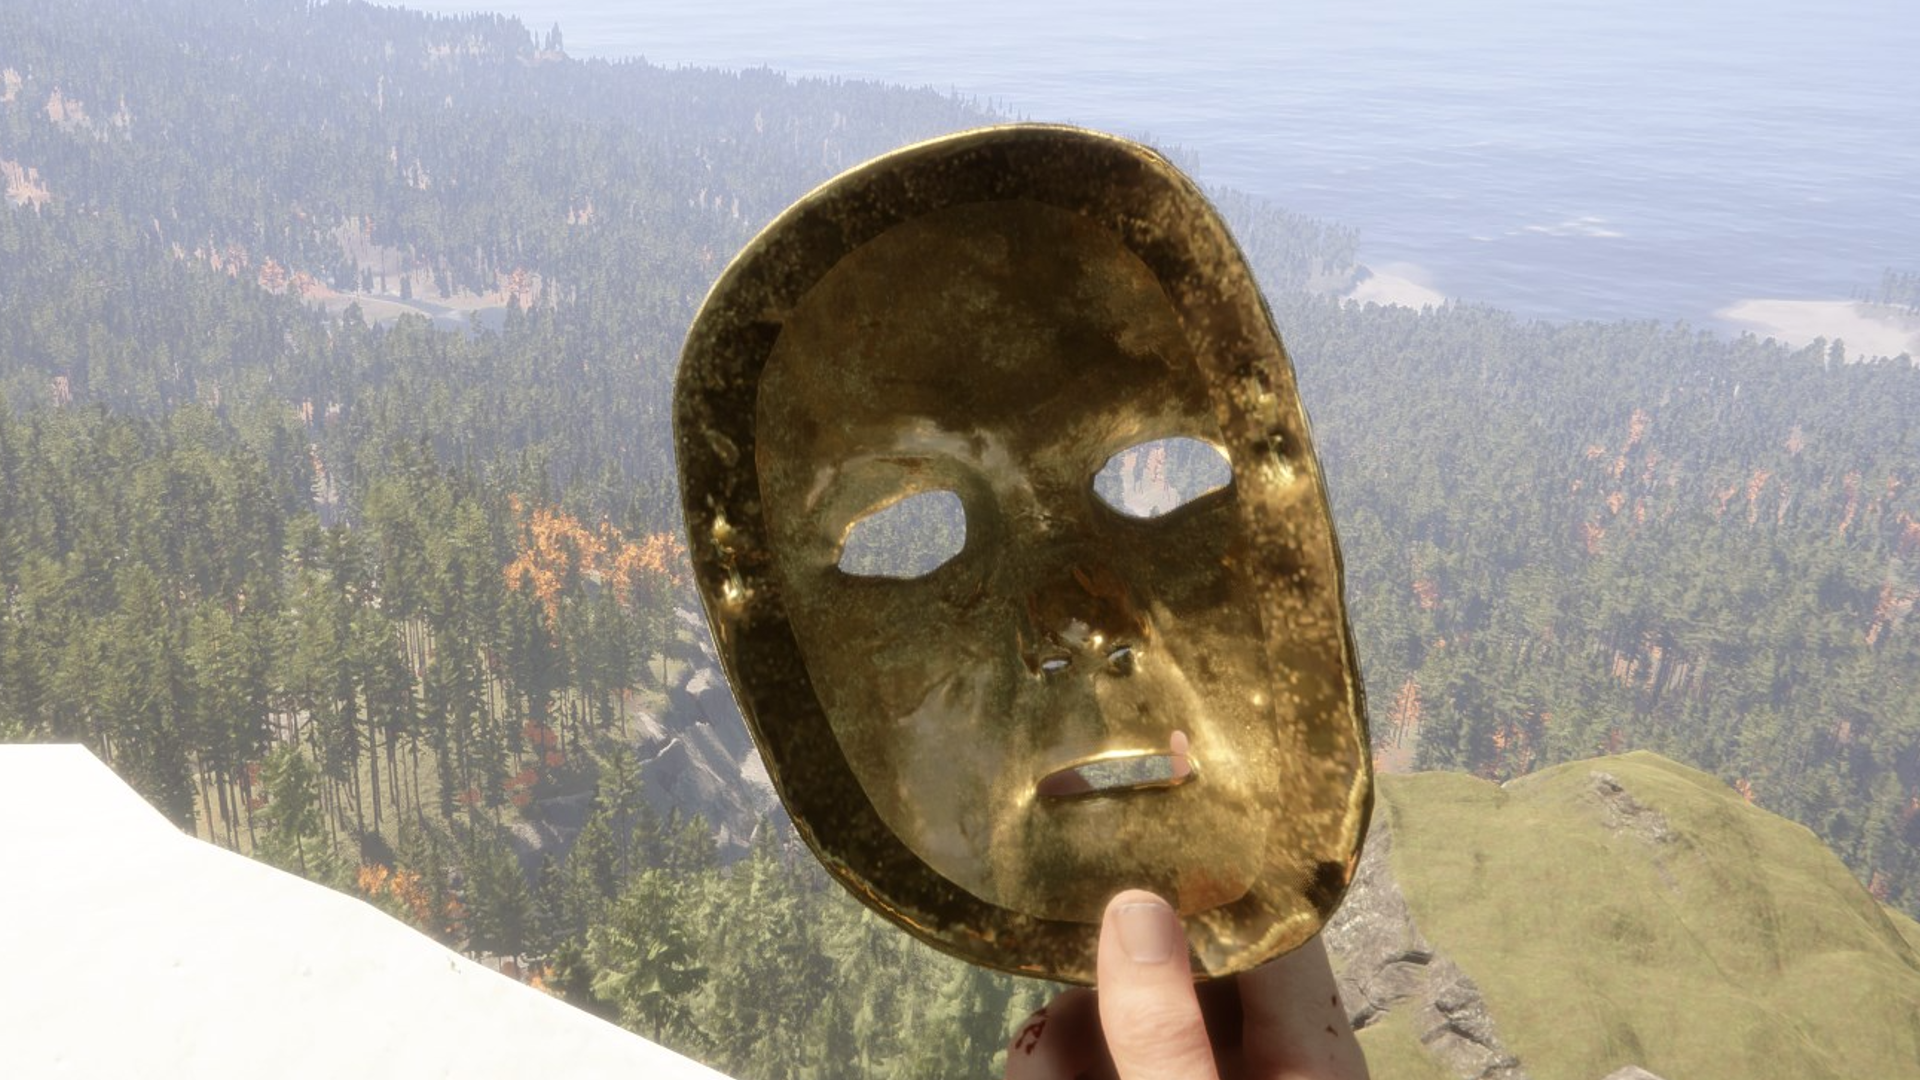 Sons of the Forest player holds the Golden Mask on a snowy mountain overlooking the forest below.